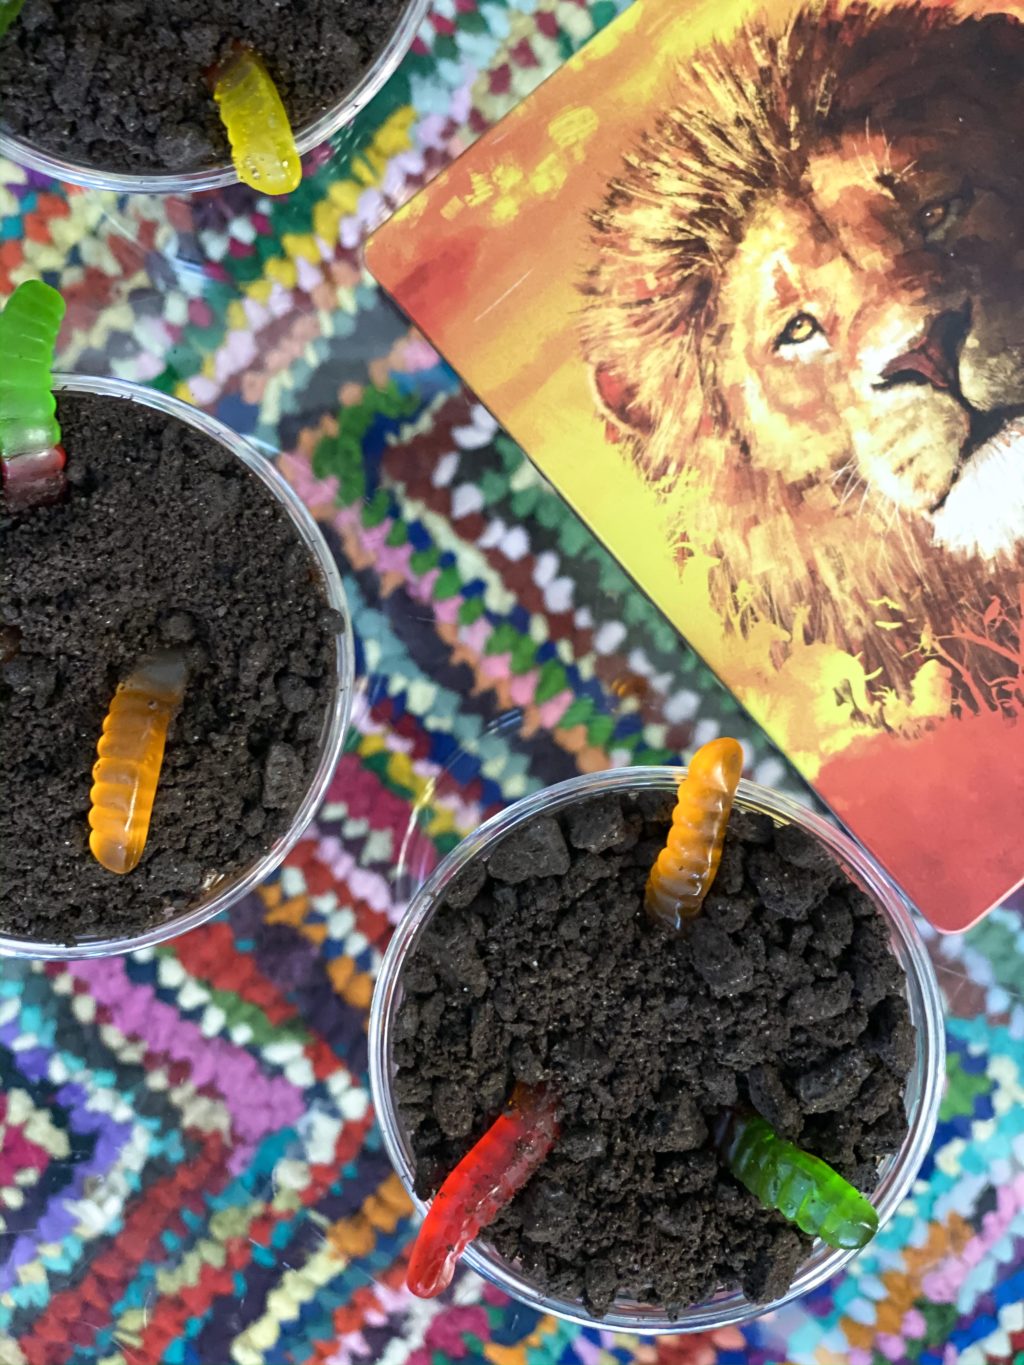 Oreo dirt pudding cups with gummy worms on table with colorful rug inspired by The Lion King movie.